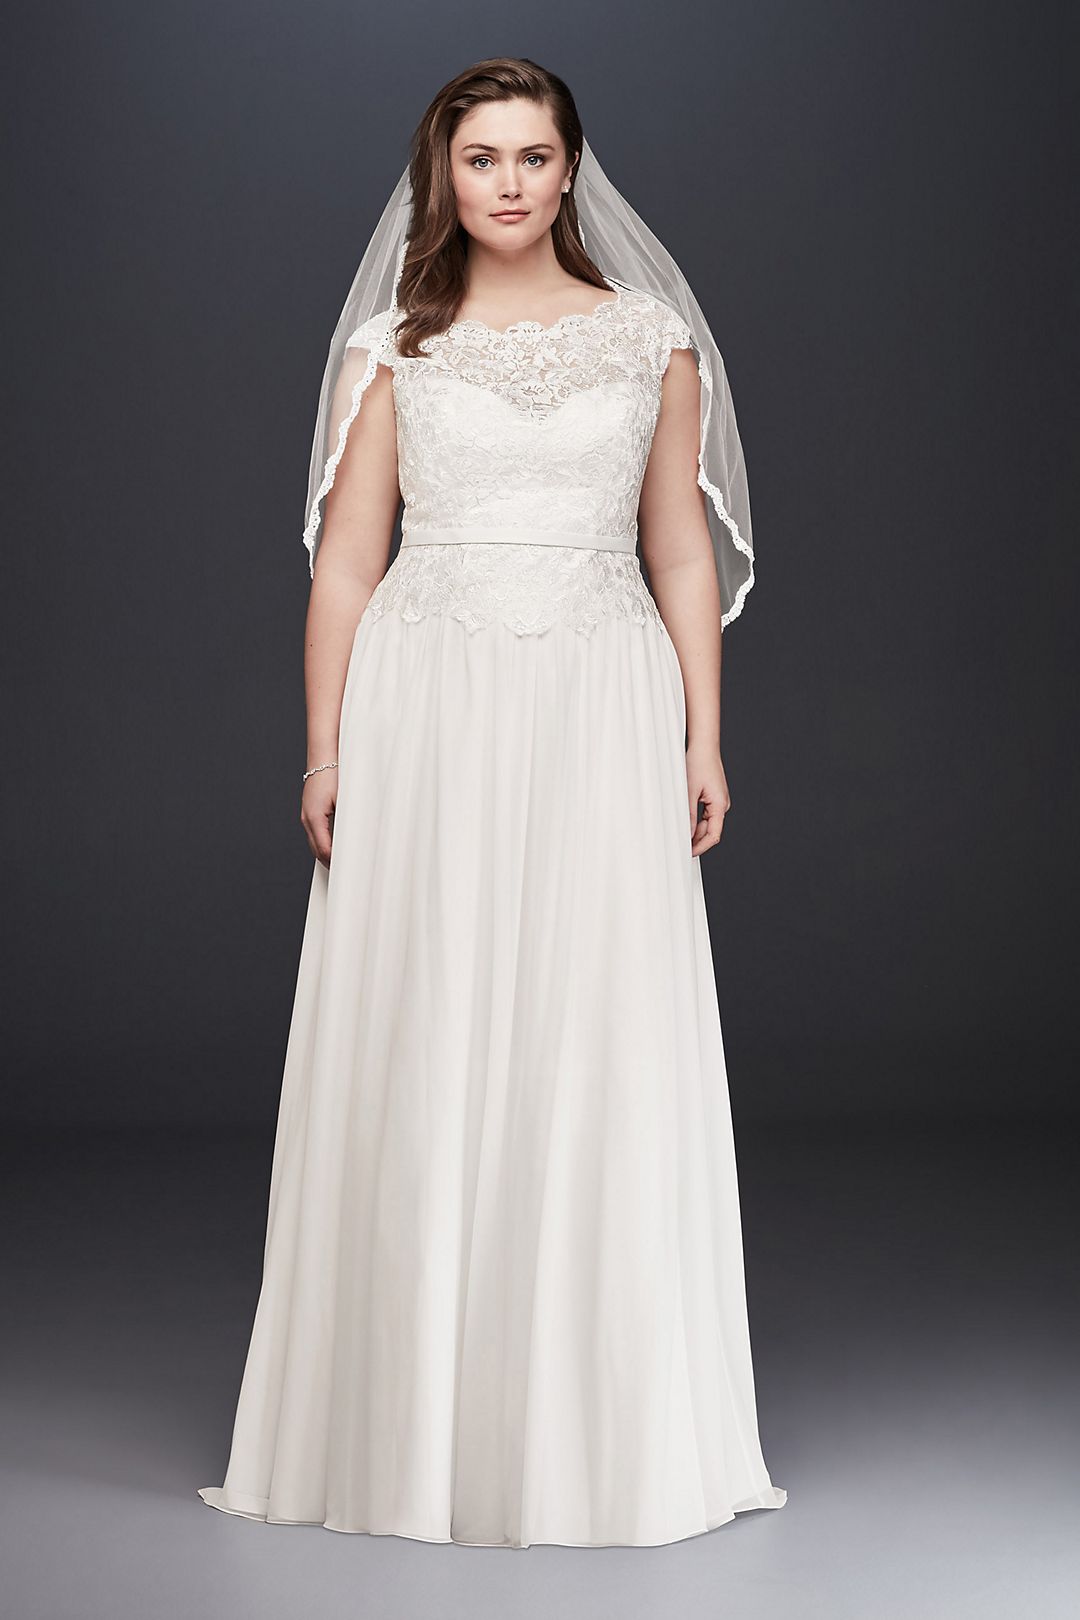 As-Is Illusion Lace Plus Size Wedding Dress Image 1